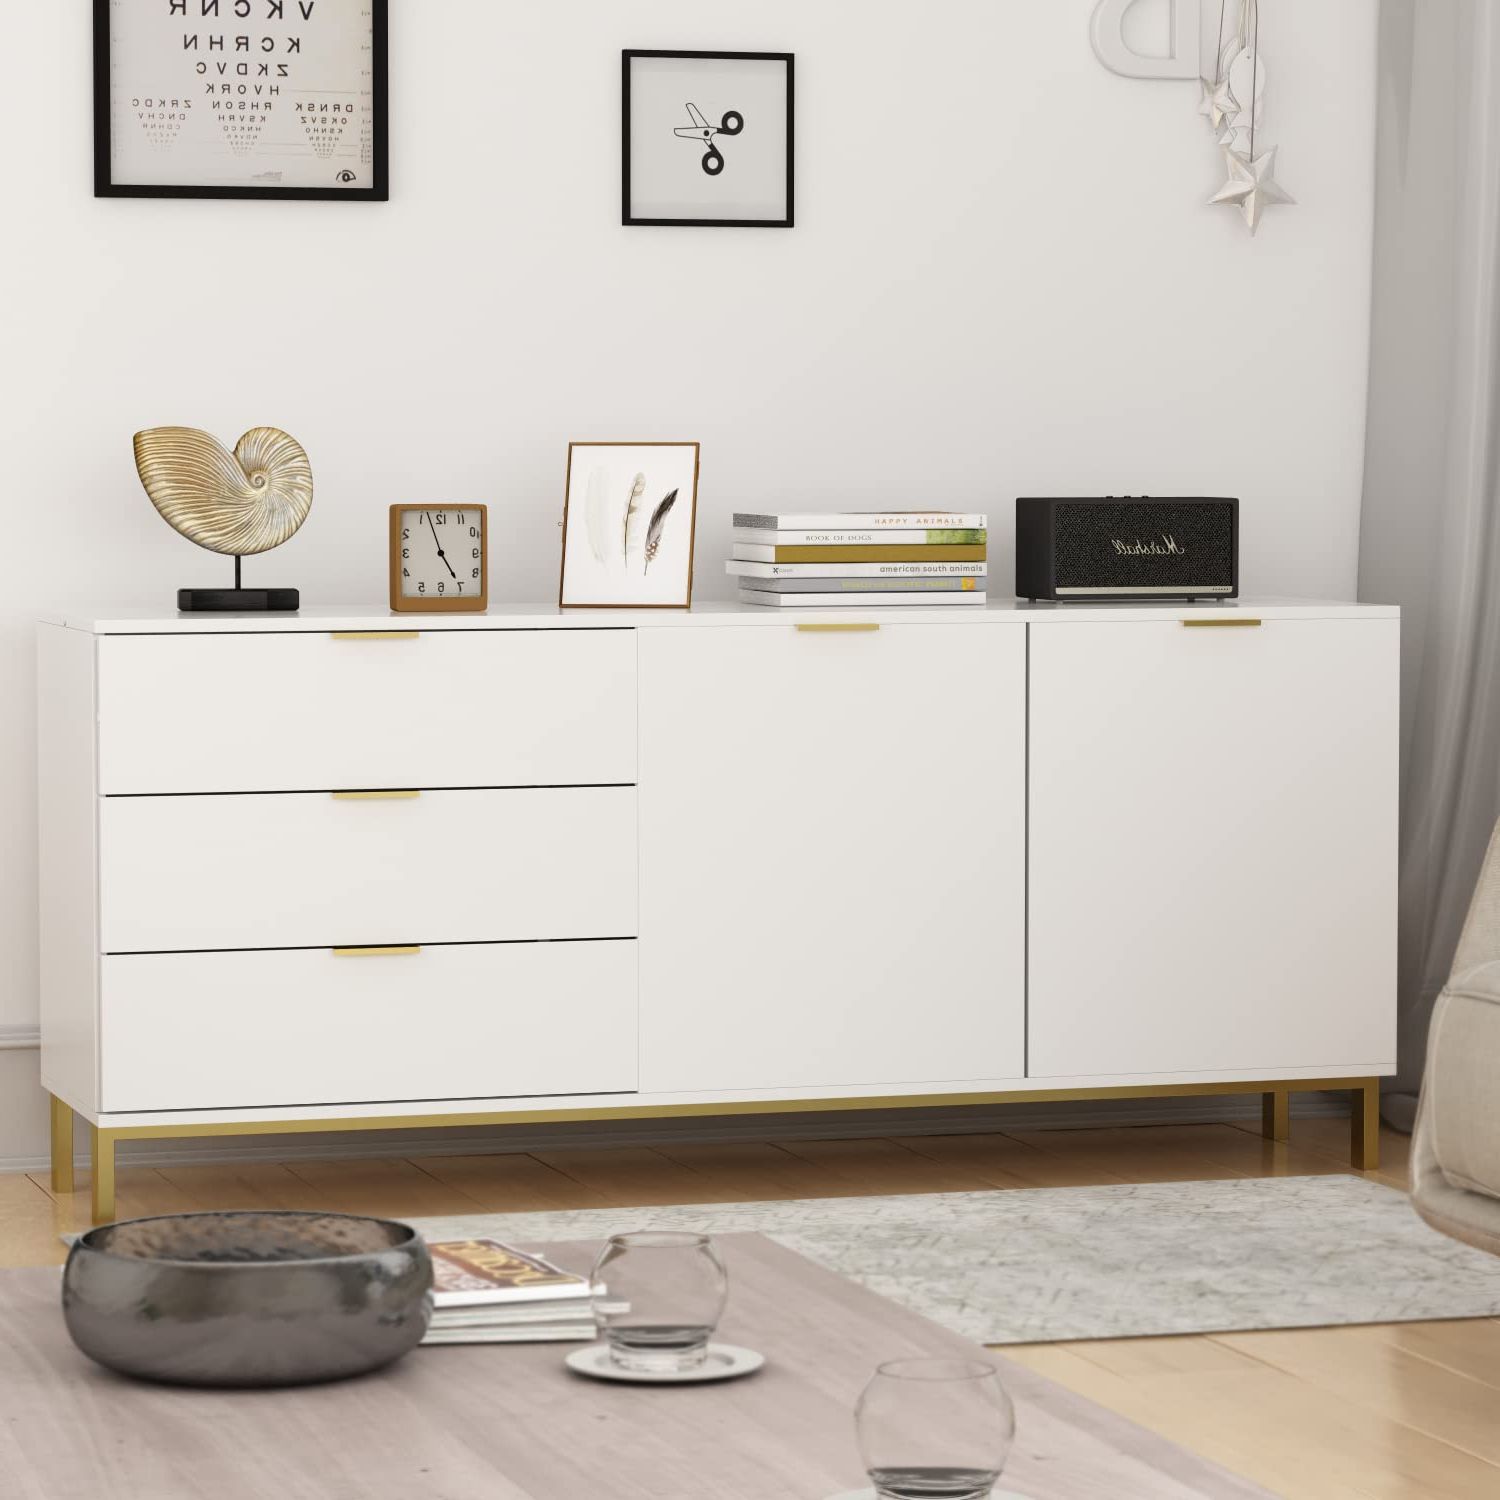 3 Drawers Sideboards Storage Cabinet Throughout Newest Amazon – Aiegle Sideboard Buffet Cabinet With 3 Drawers & 2 Doors,  Kitchen Storage Entryway Cupboard With Gold Metal Legs, White (62.9" L X  15.7" W X  (View 6 of 10)